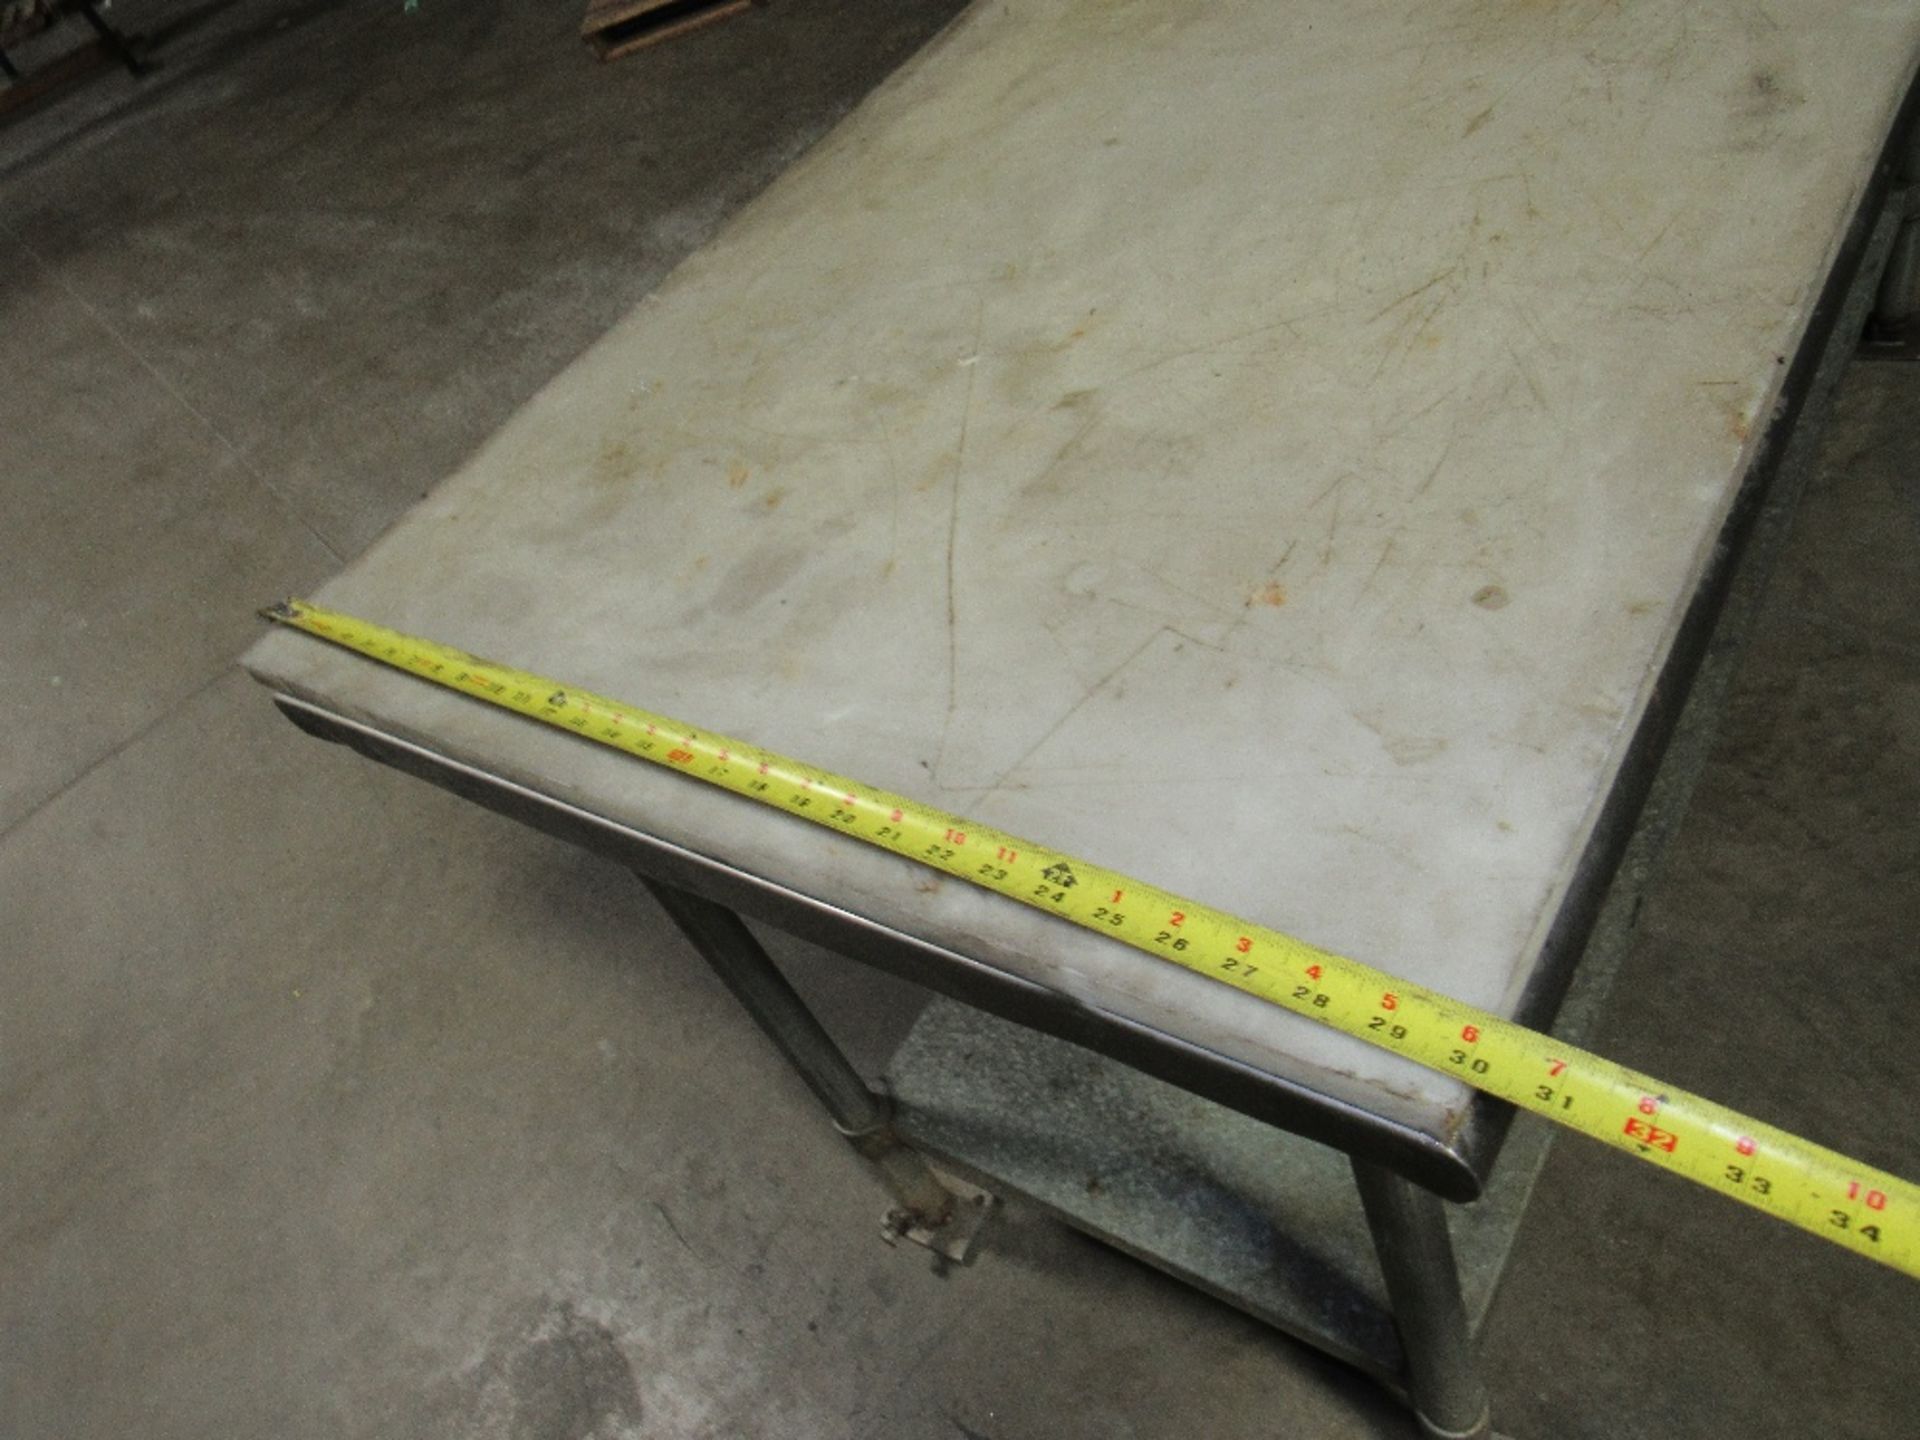 Stainless Steel Table with Teflon removable Plate Cover - Galvanized second surface -- (RIGGING - Image 4 of 14